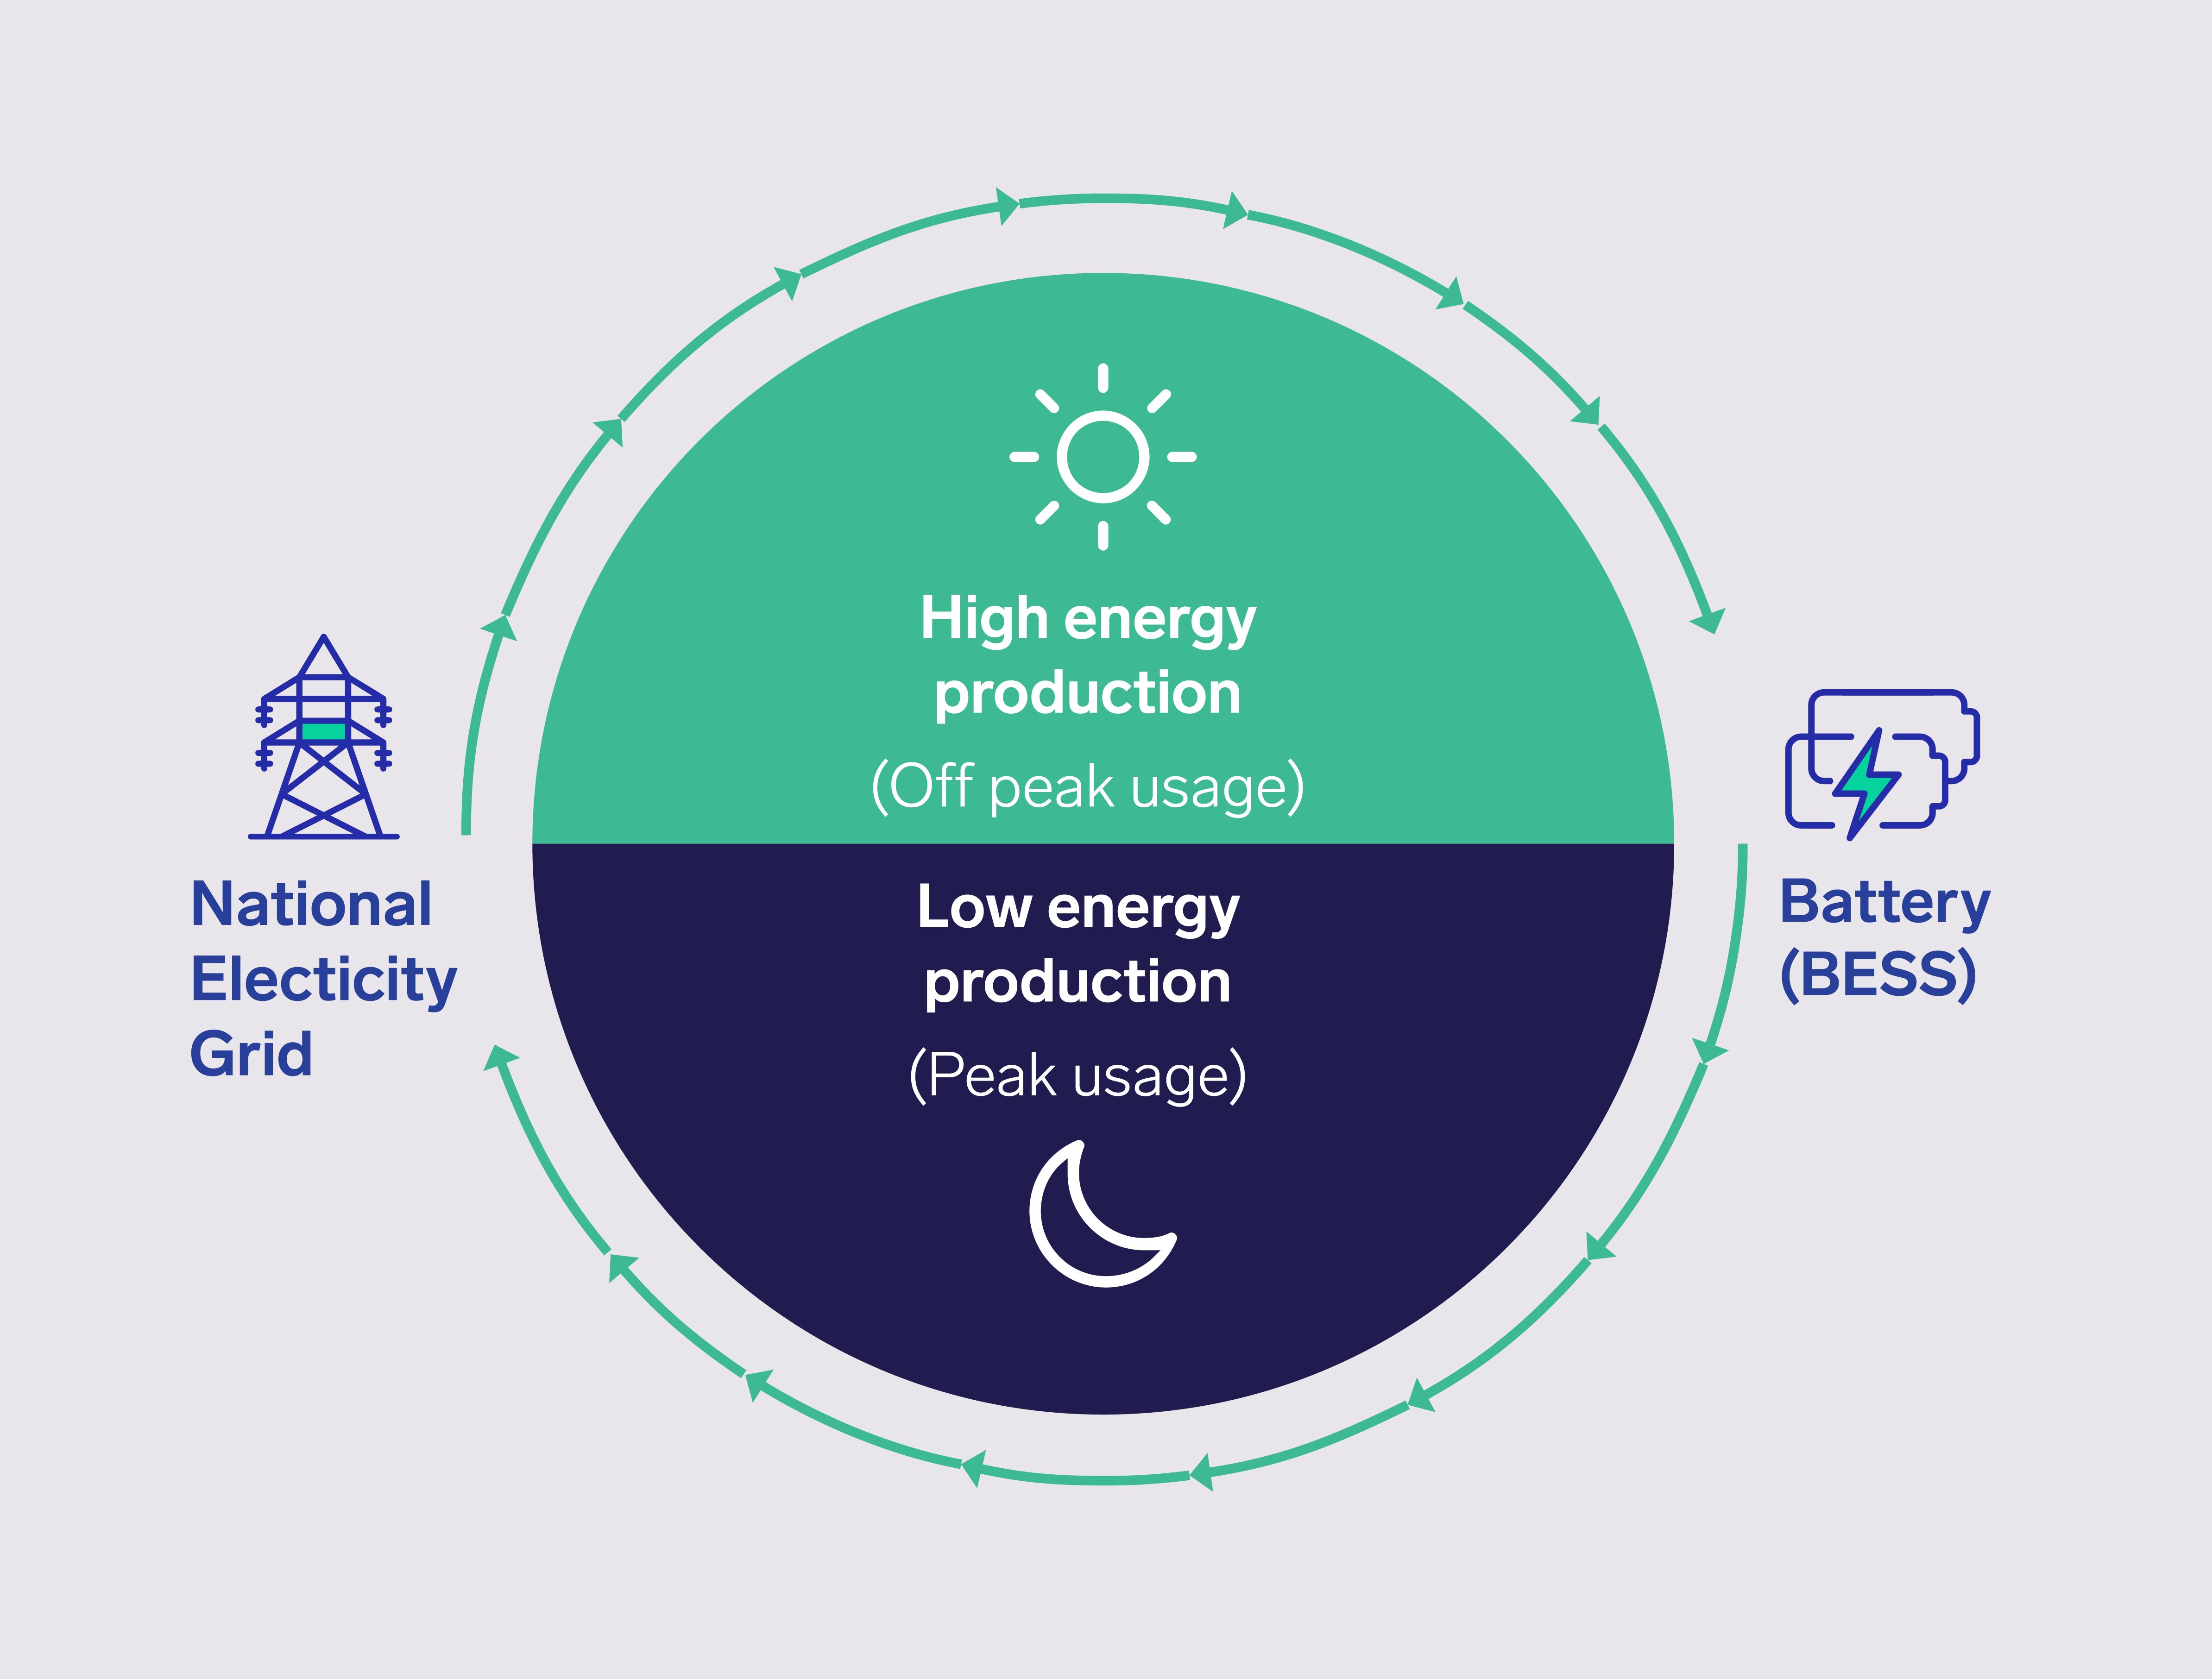 The BESS will store surplus energy and feed it back into the grid at peak usage times.